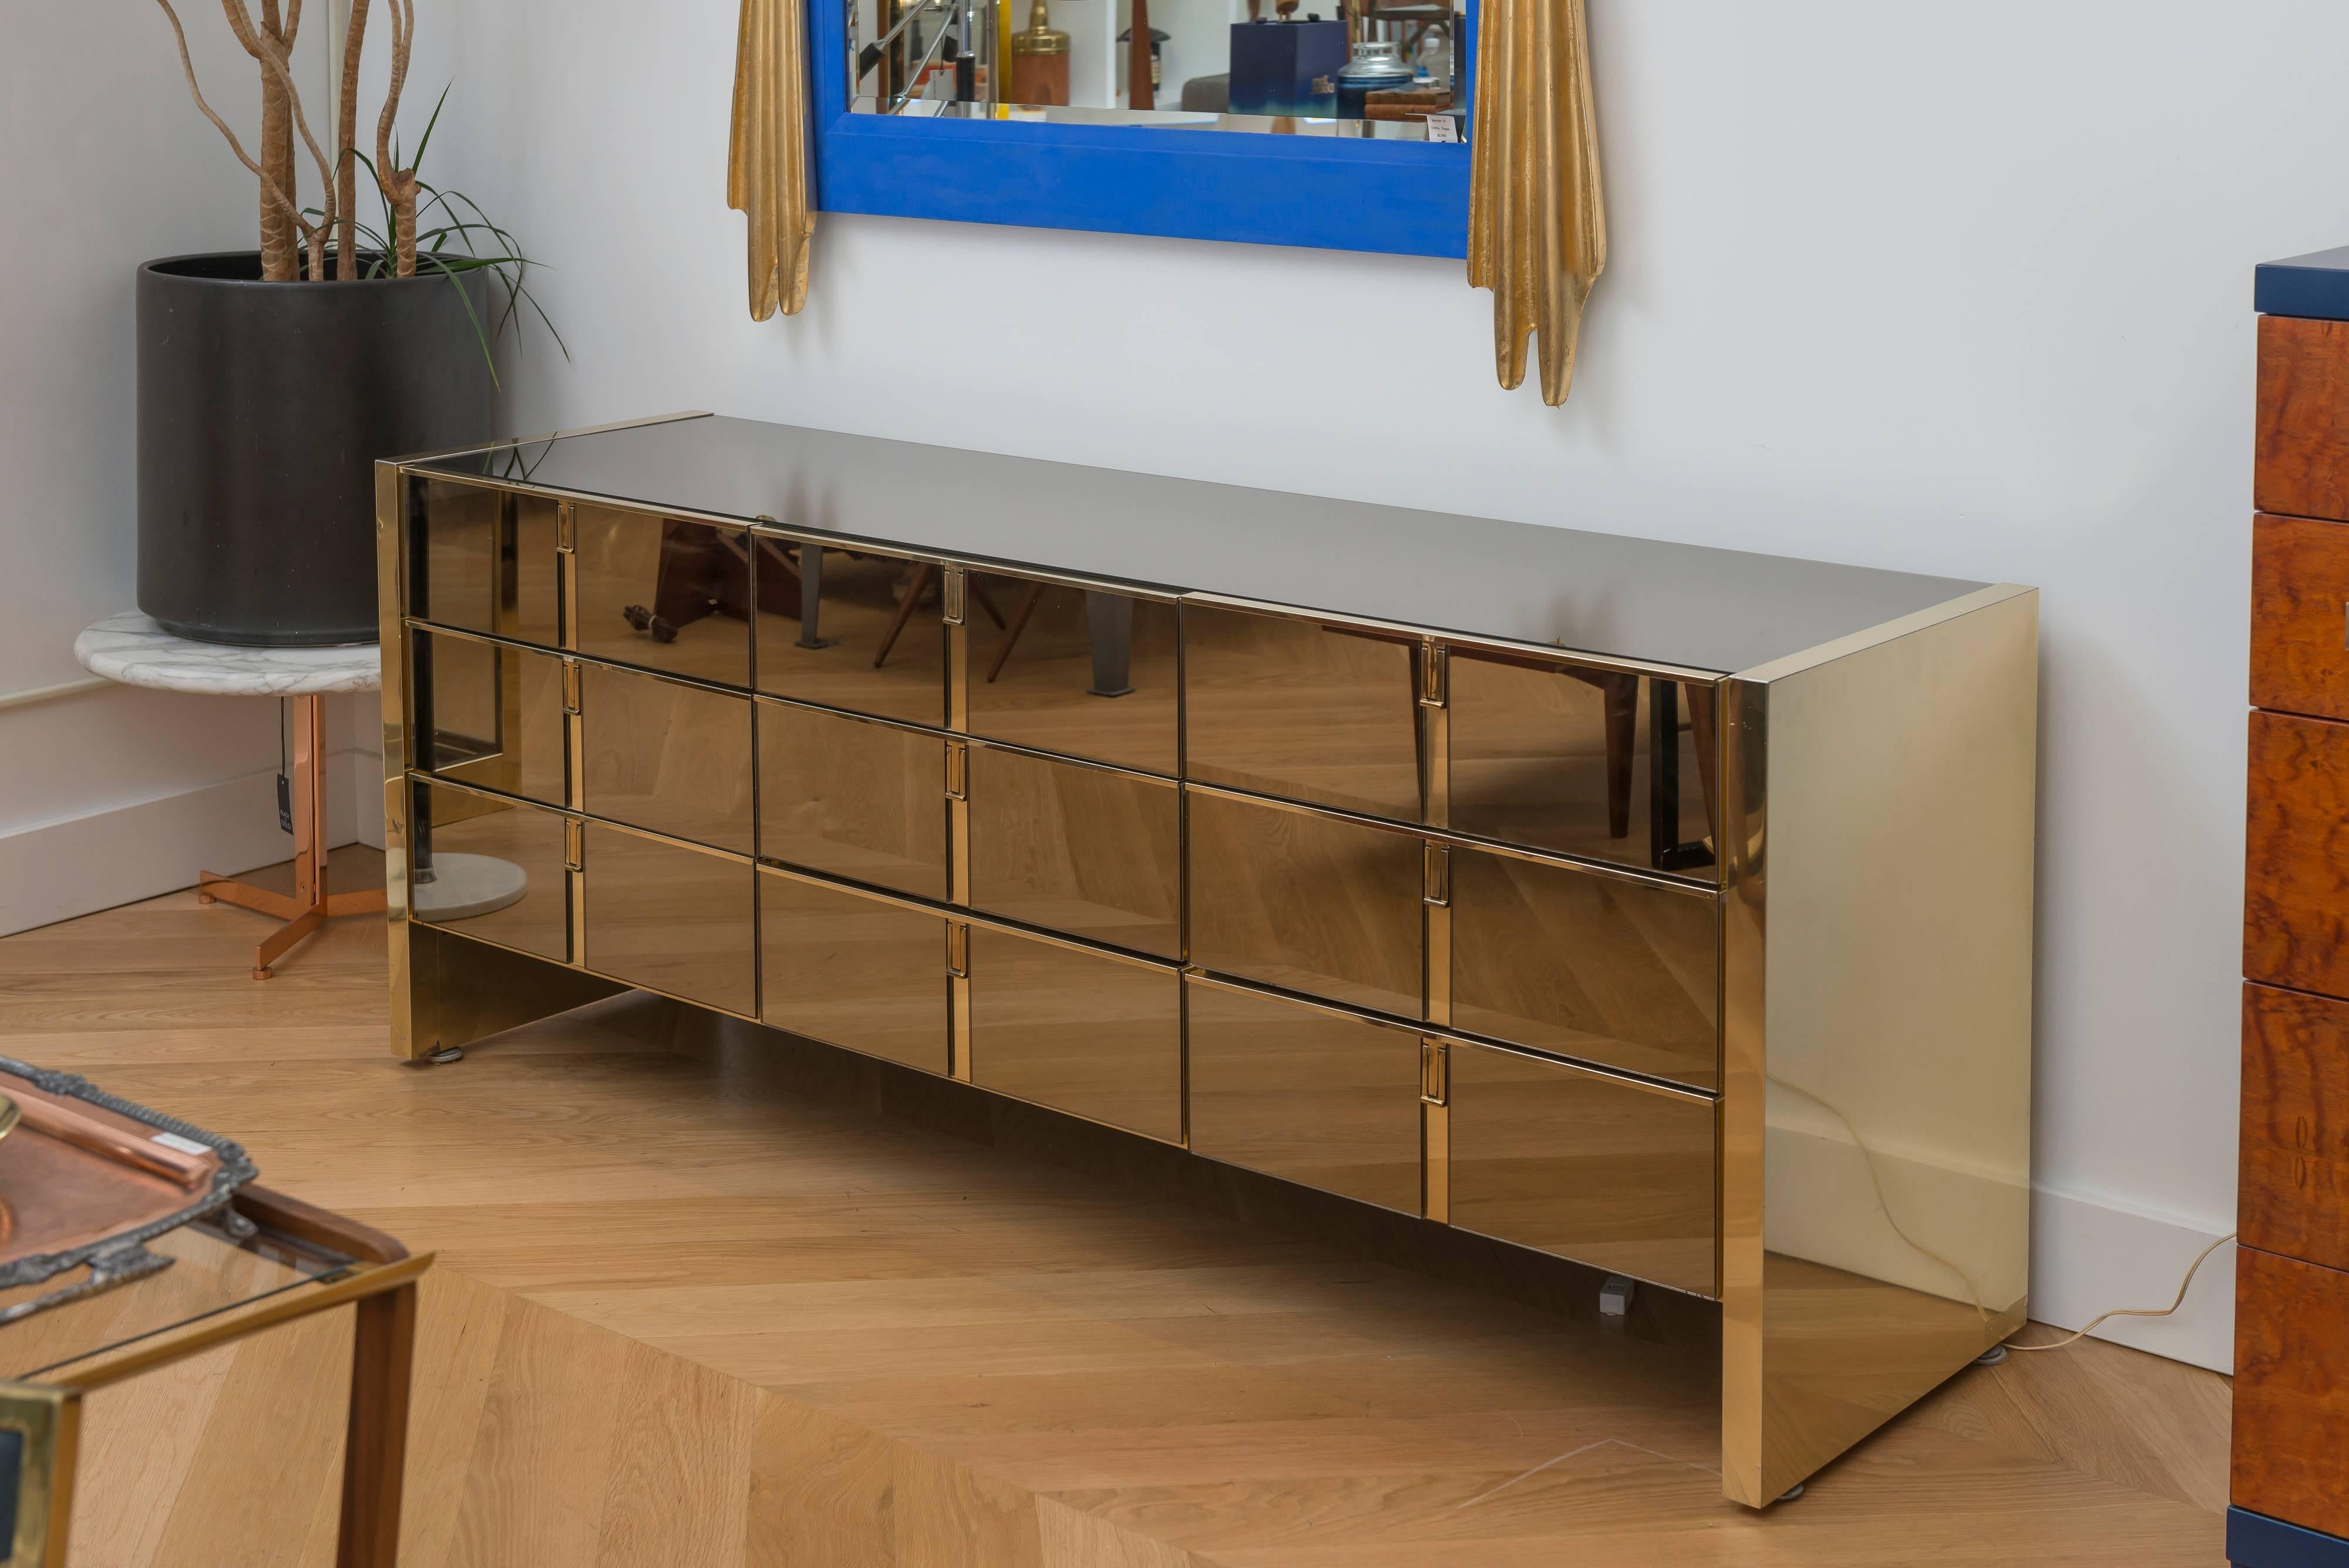 Unique mirror and brass detailed dresser by Ello Furniture makers. The beautiful mirror is a stunning example of Mid-Century Modern at its most glamorous. Nine drawers.